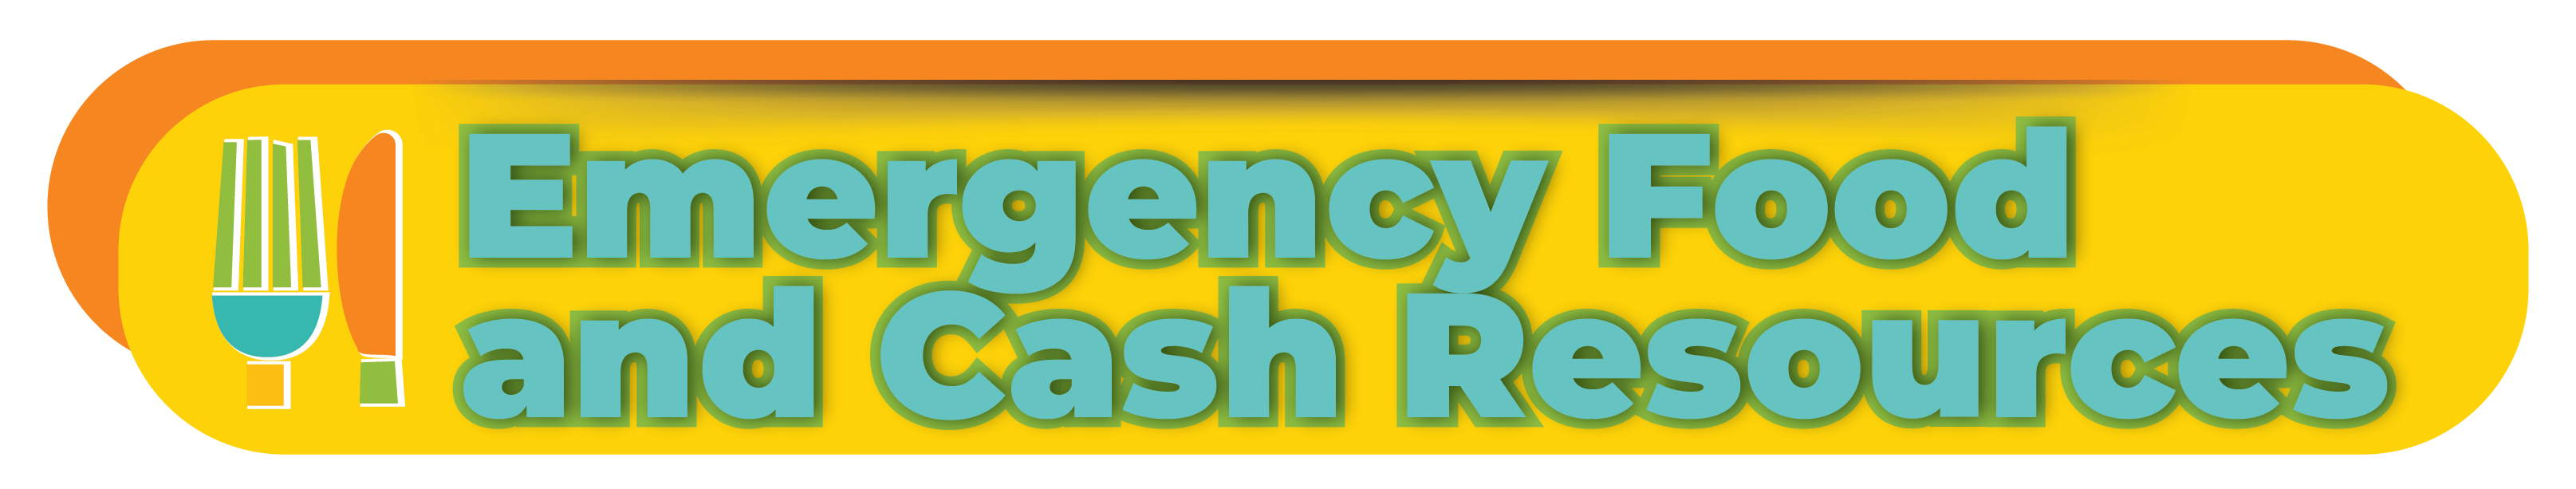 Emergency Food and Cash Resources